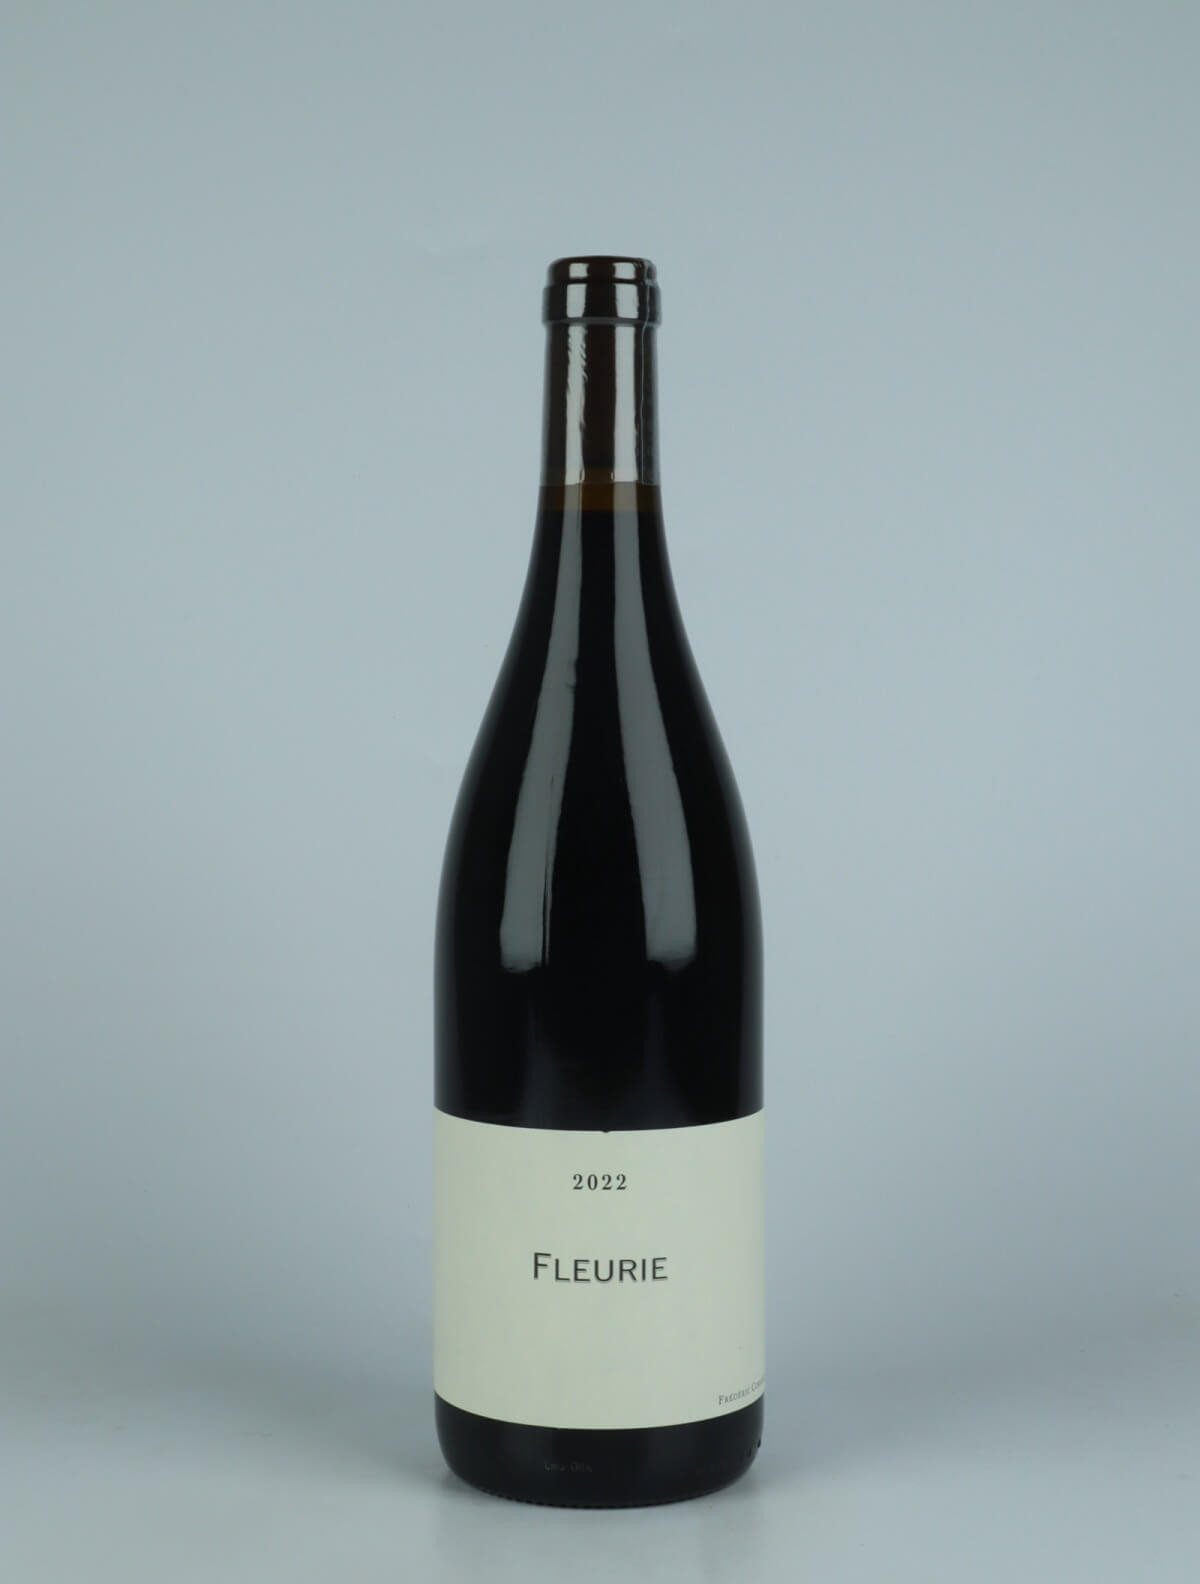 A bottle 2022 Fleurie Red wine from Frédéric Cossard, Beaujolais in France